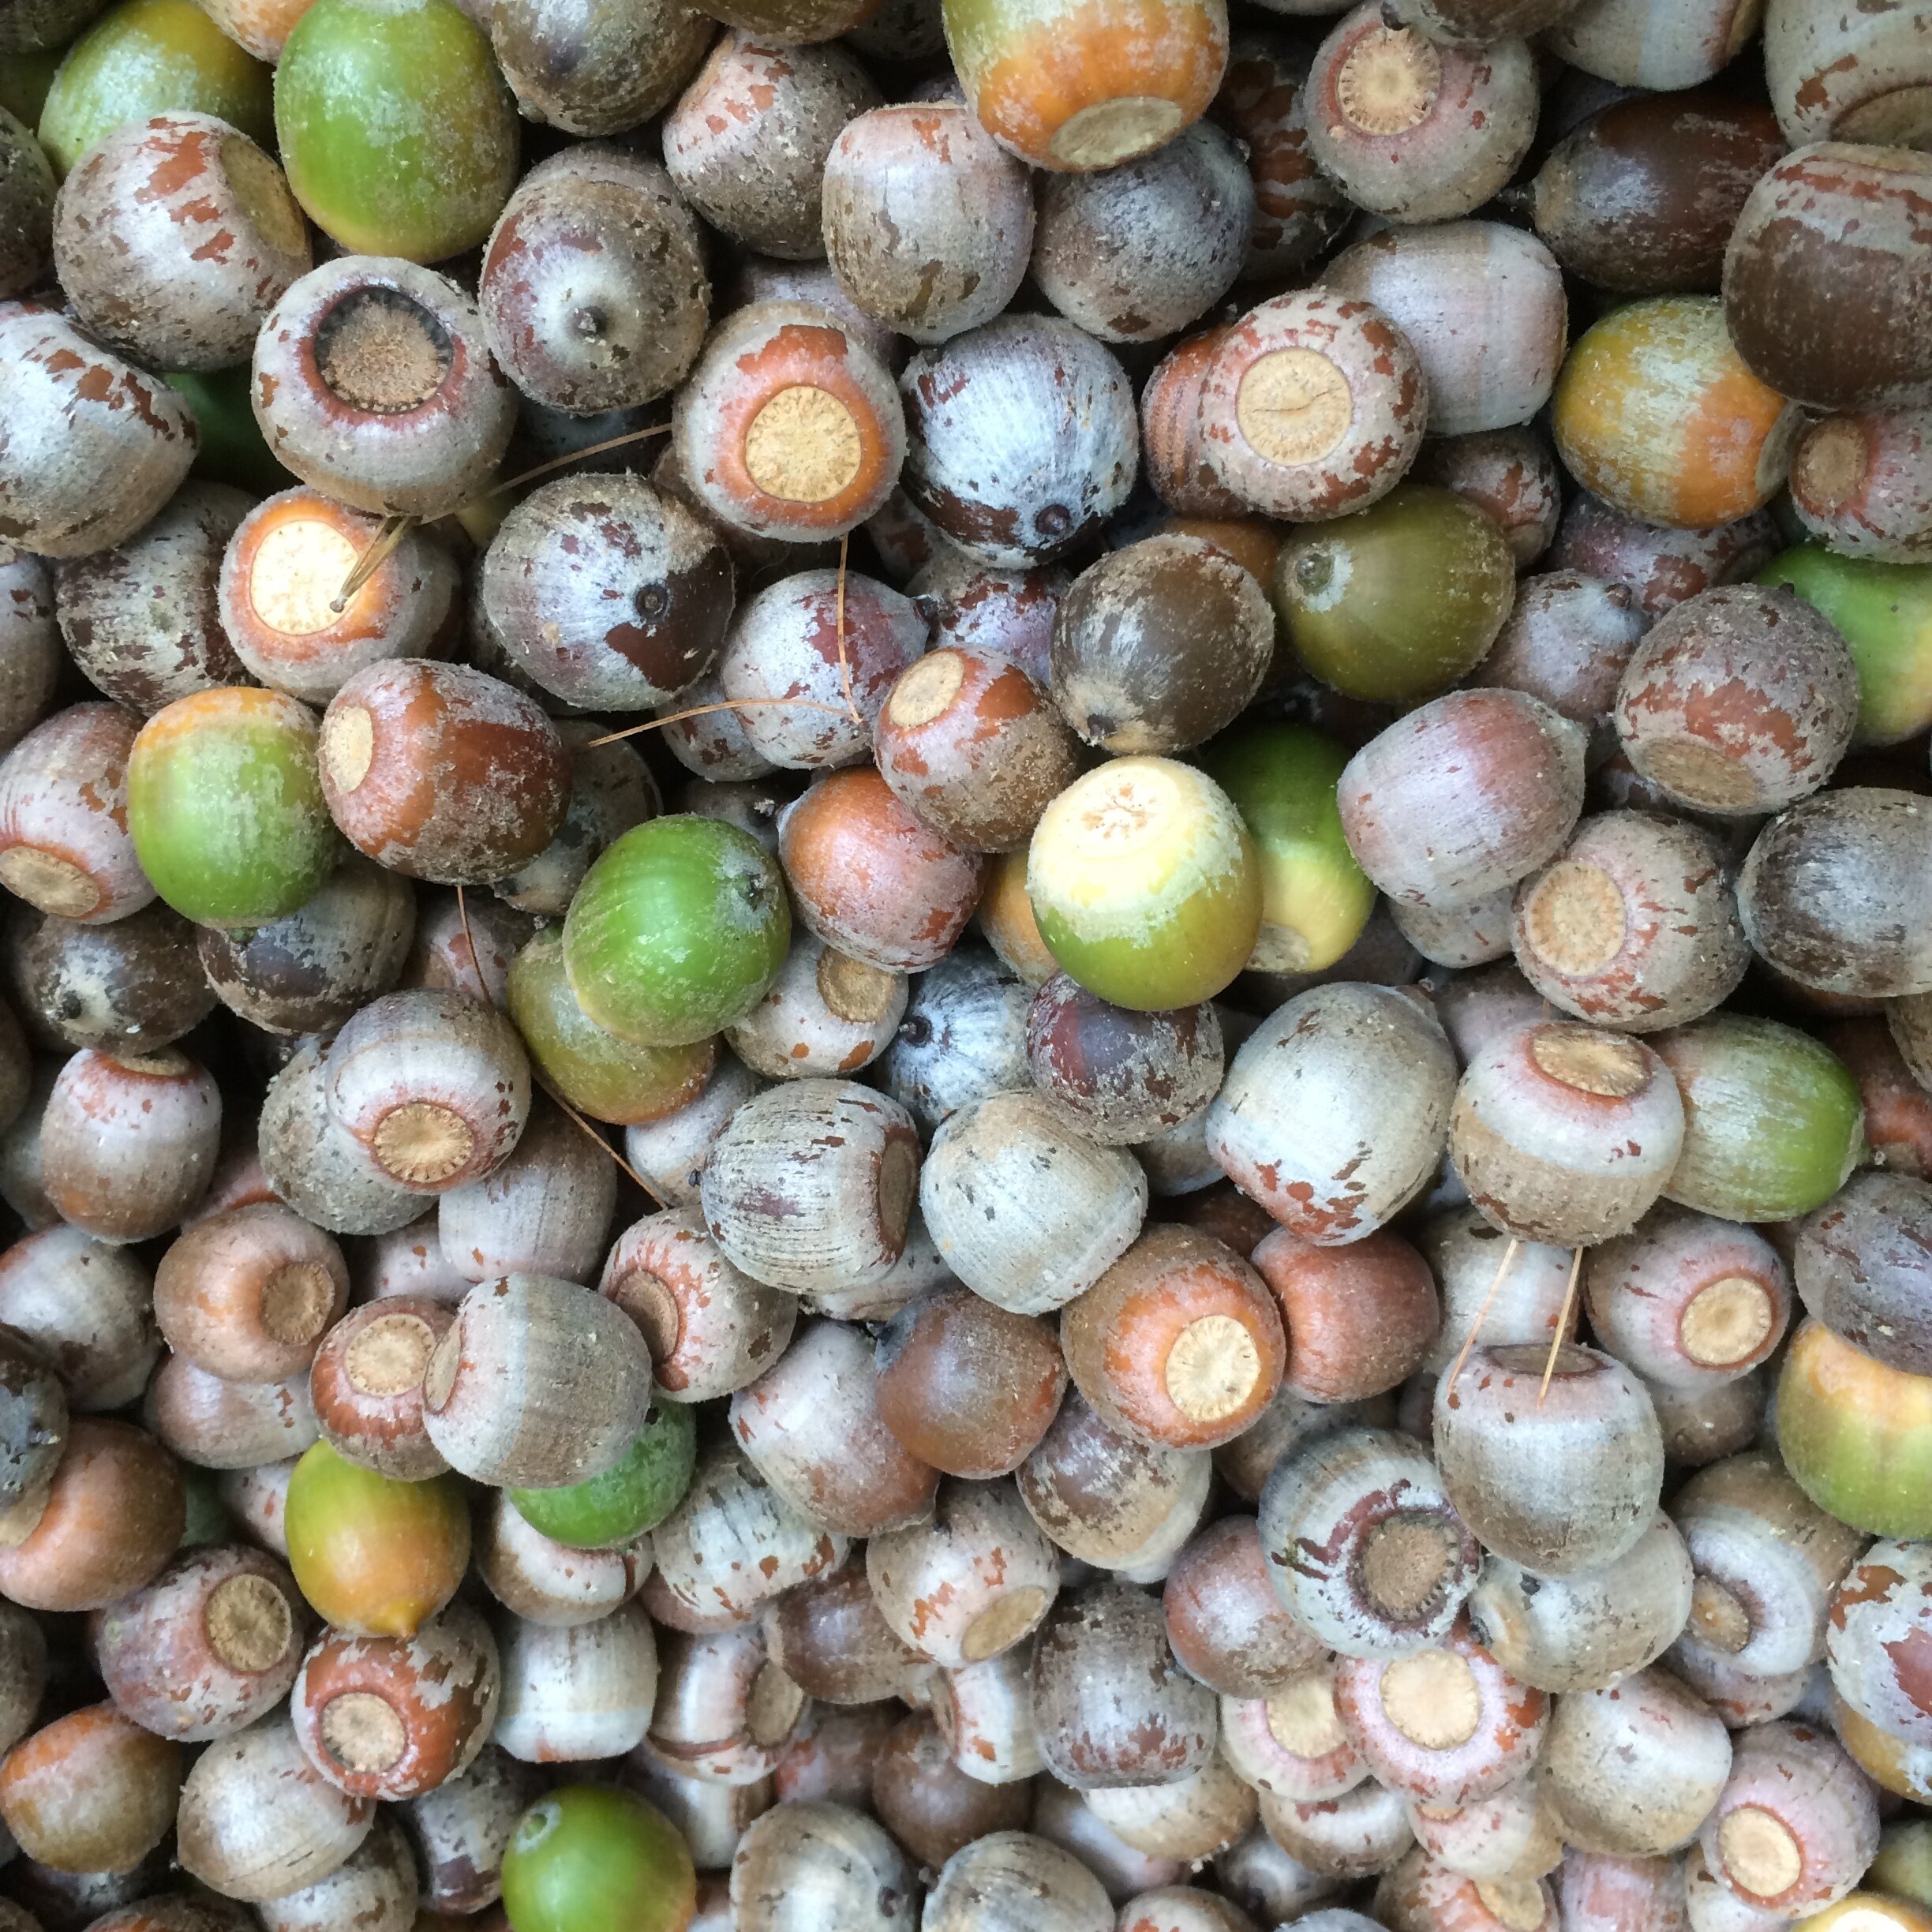 The way I collect and process Acorns — Edgewood Nursery